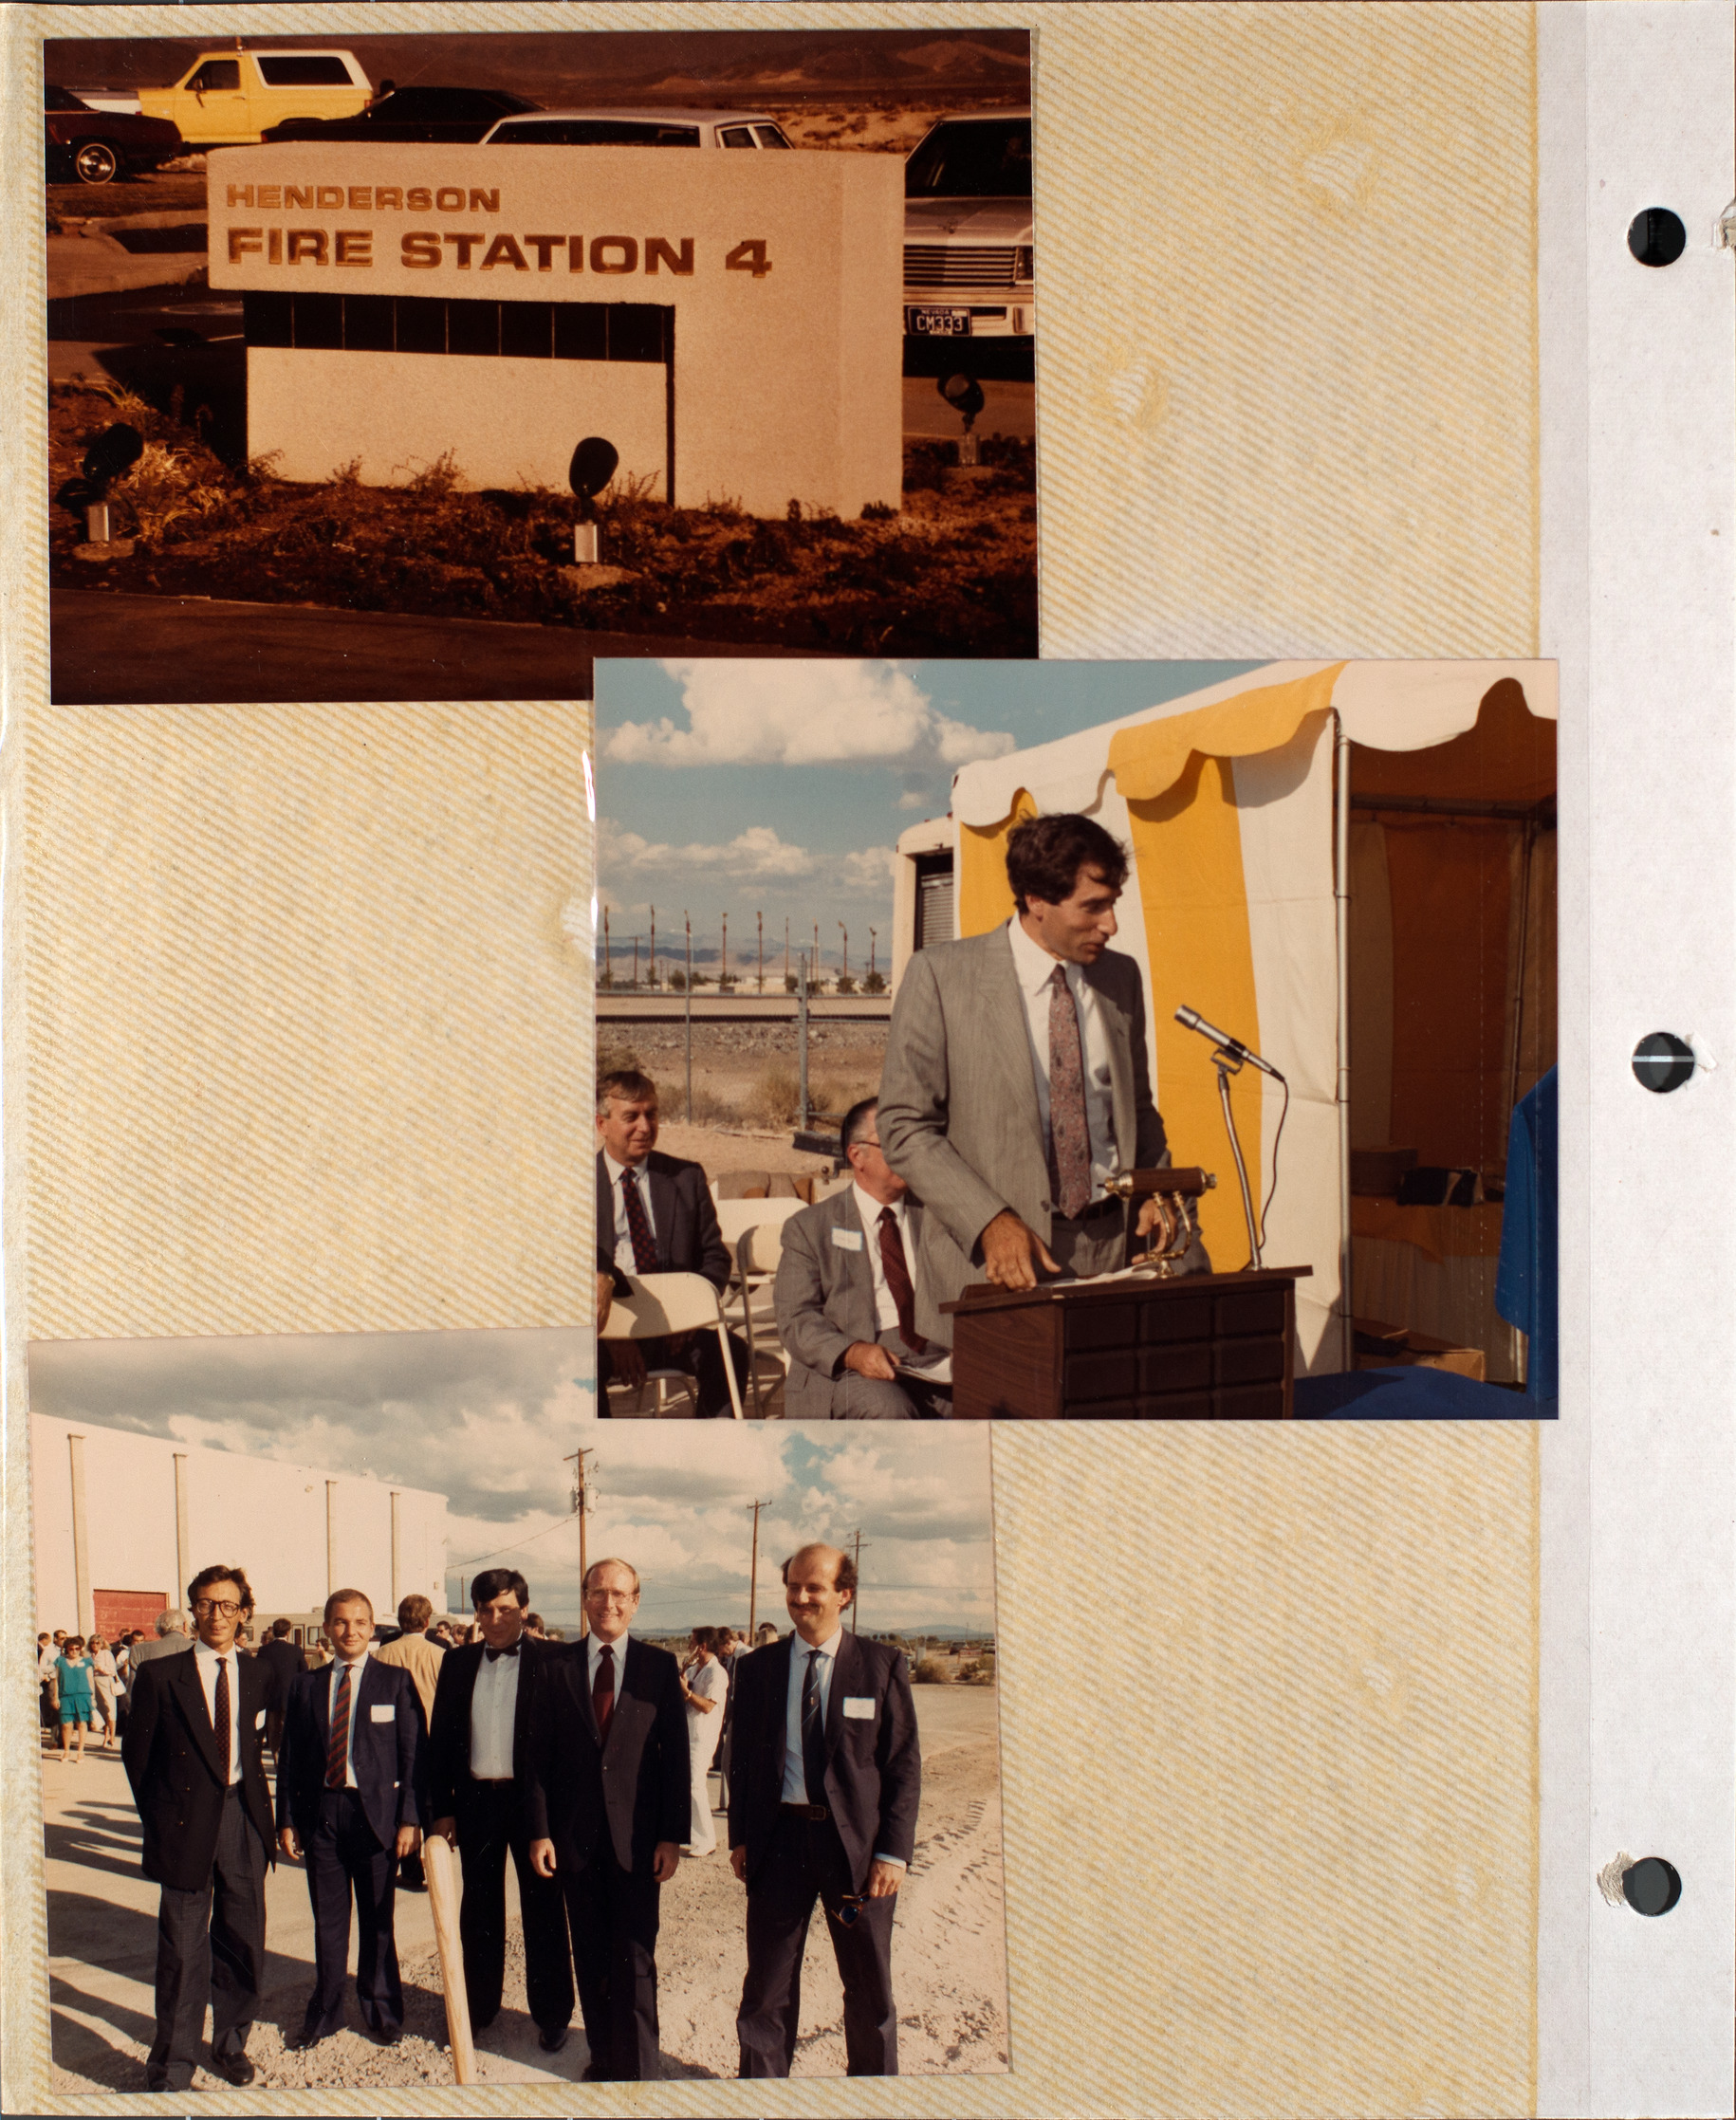 Photographs of Henderson Fire Station 4, Mark Fine, and groundbreaking